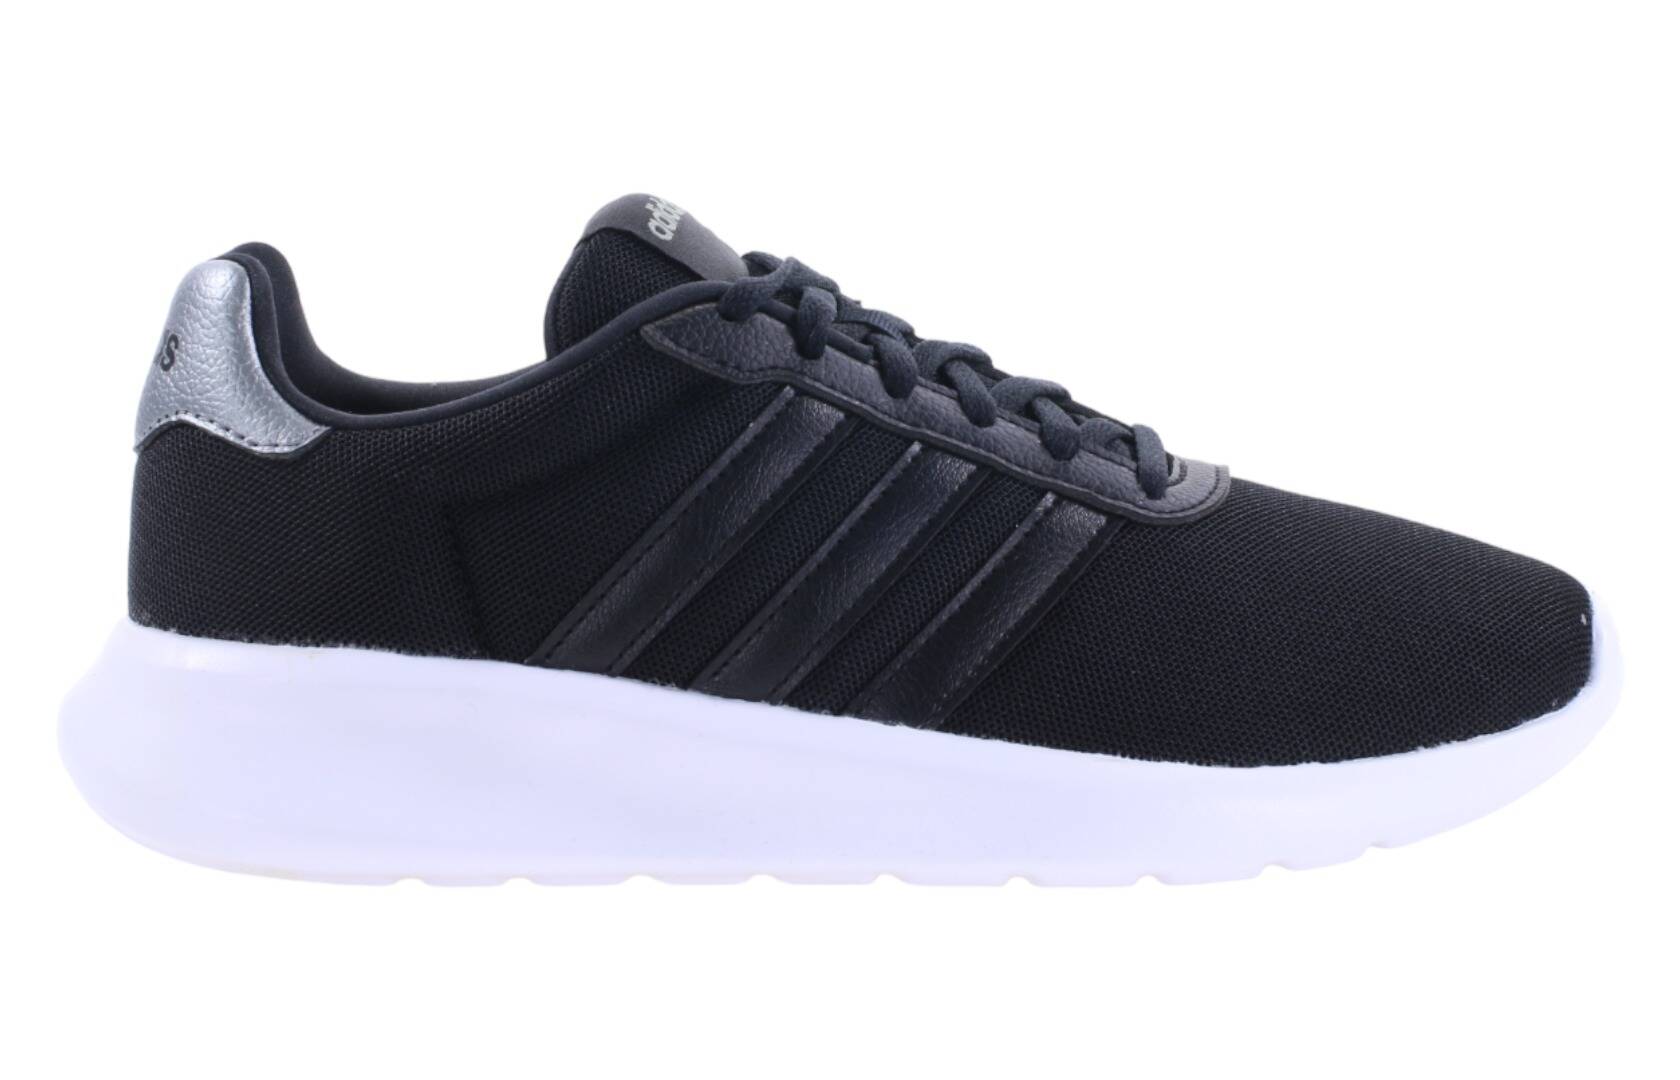 Adidas LITE RACER 3.0 GY0699 women's shoes